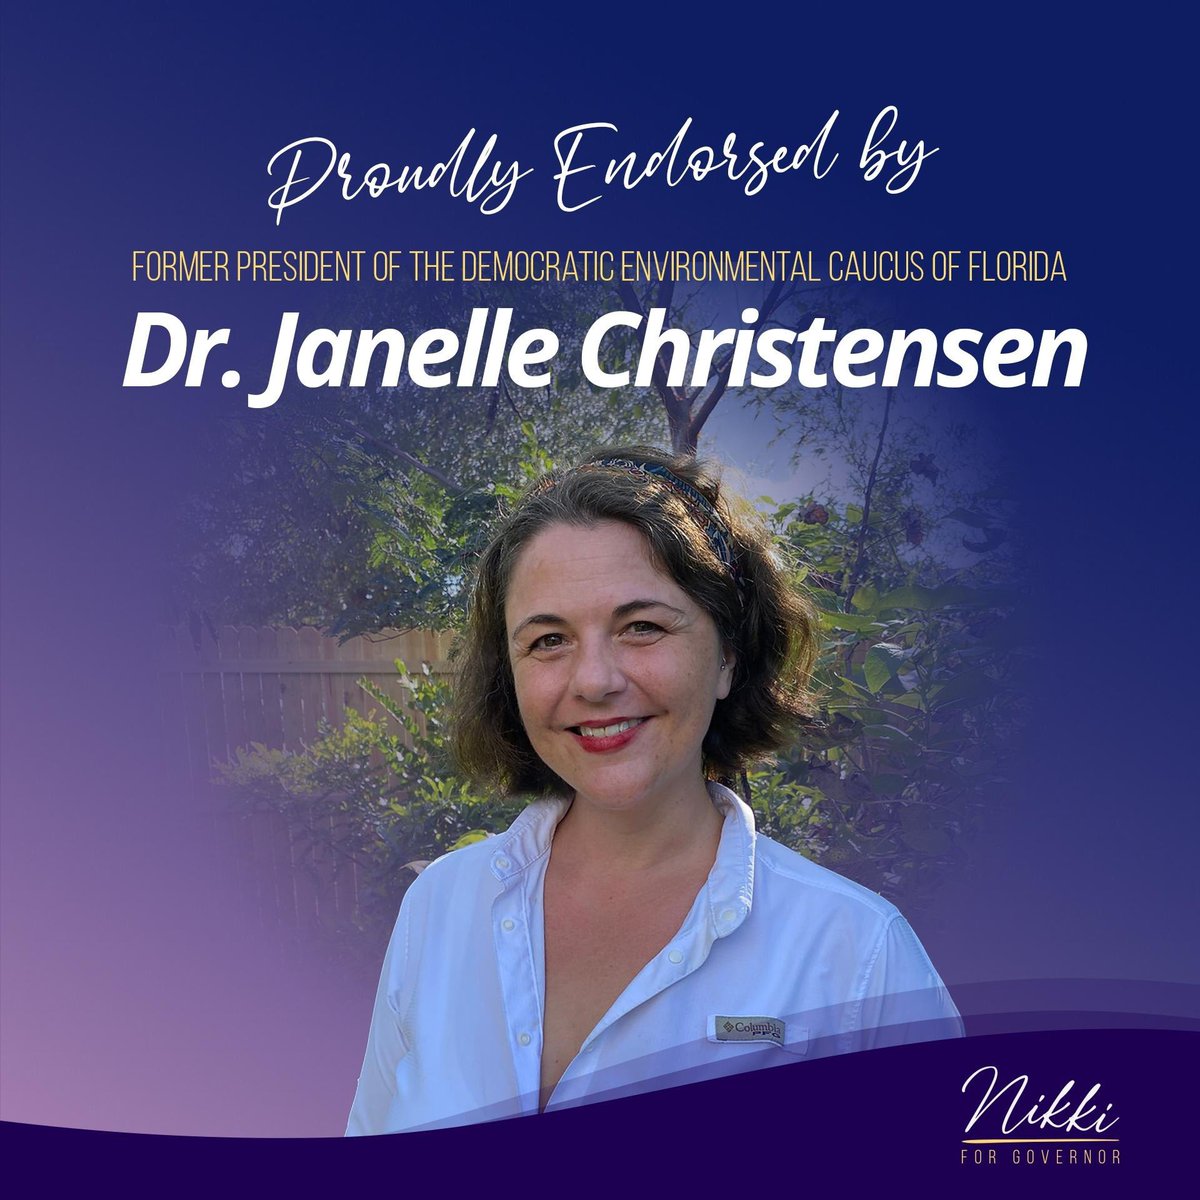 Dr. Janelle Christensen has dedicated her life to ensuring the generations of Floridians that come after us have a cleaner climate to live in. It is an honor to have her endorsement.